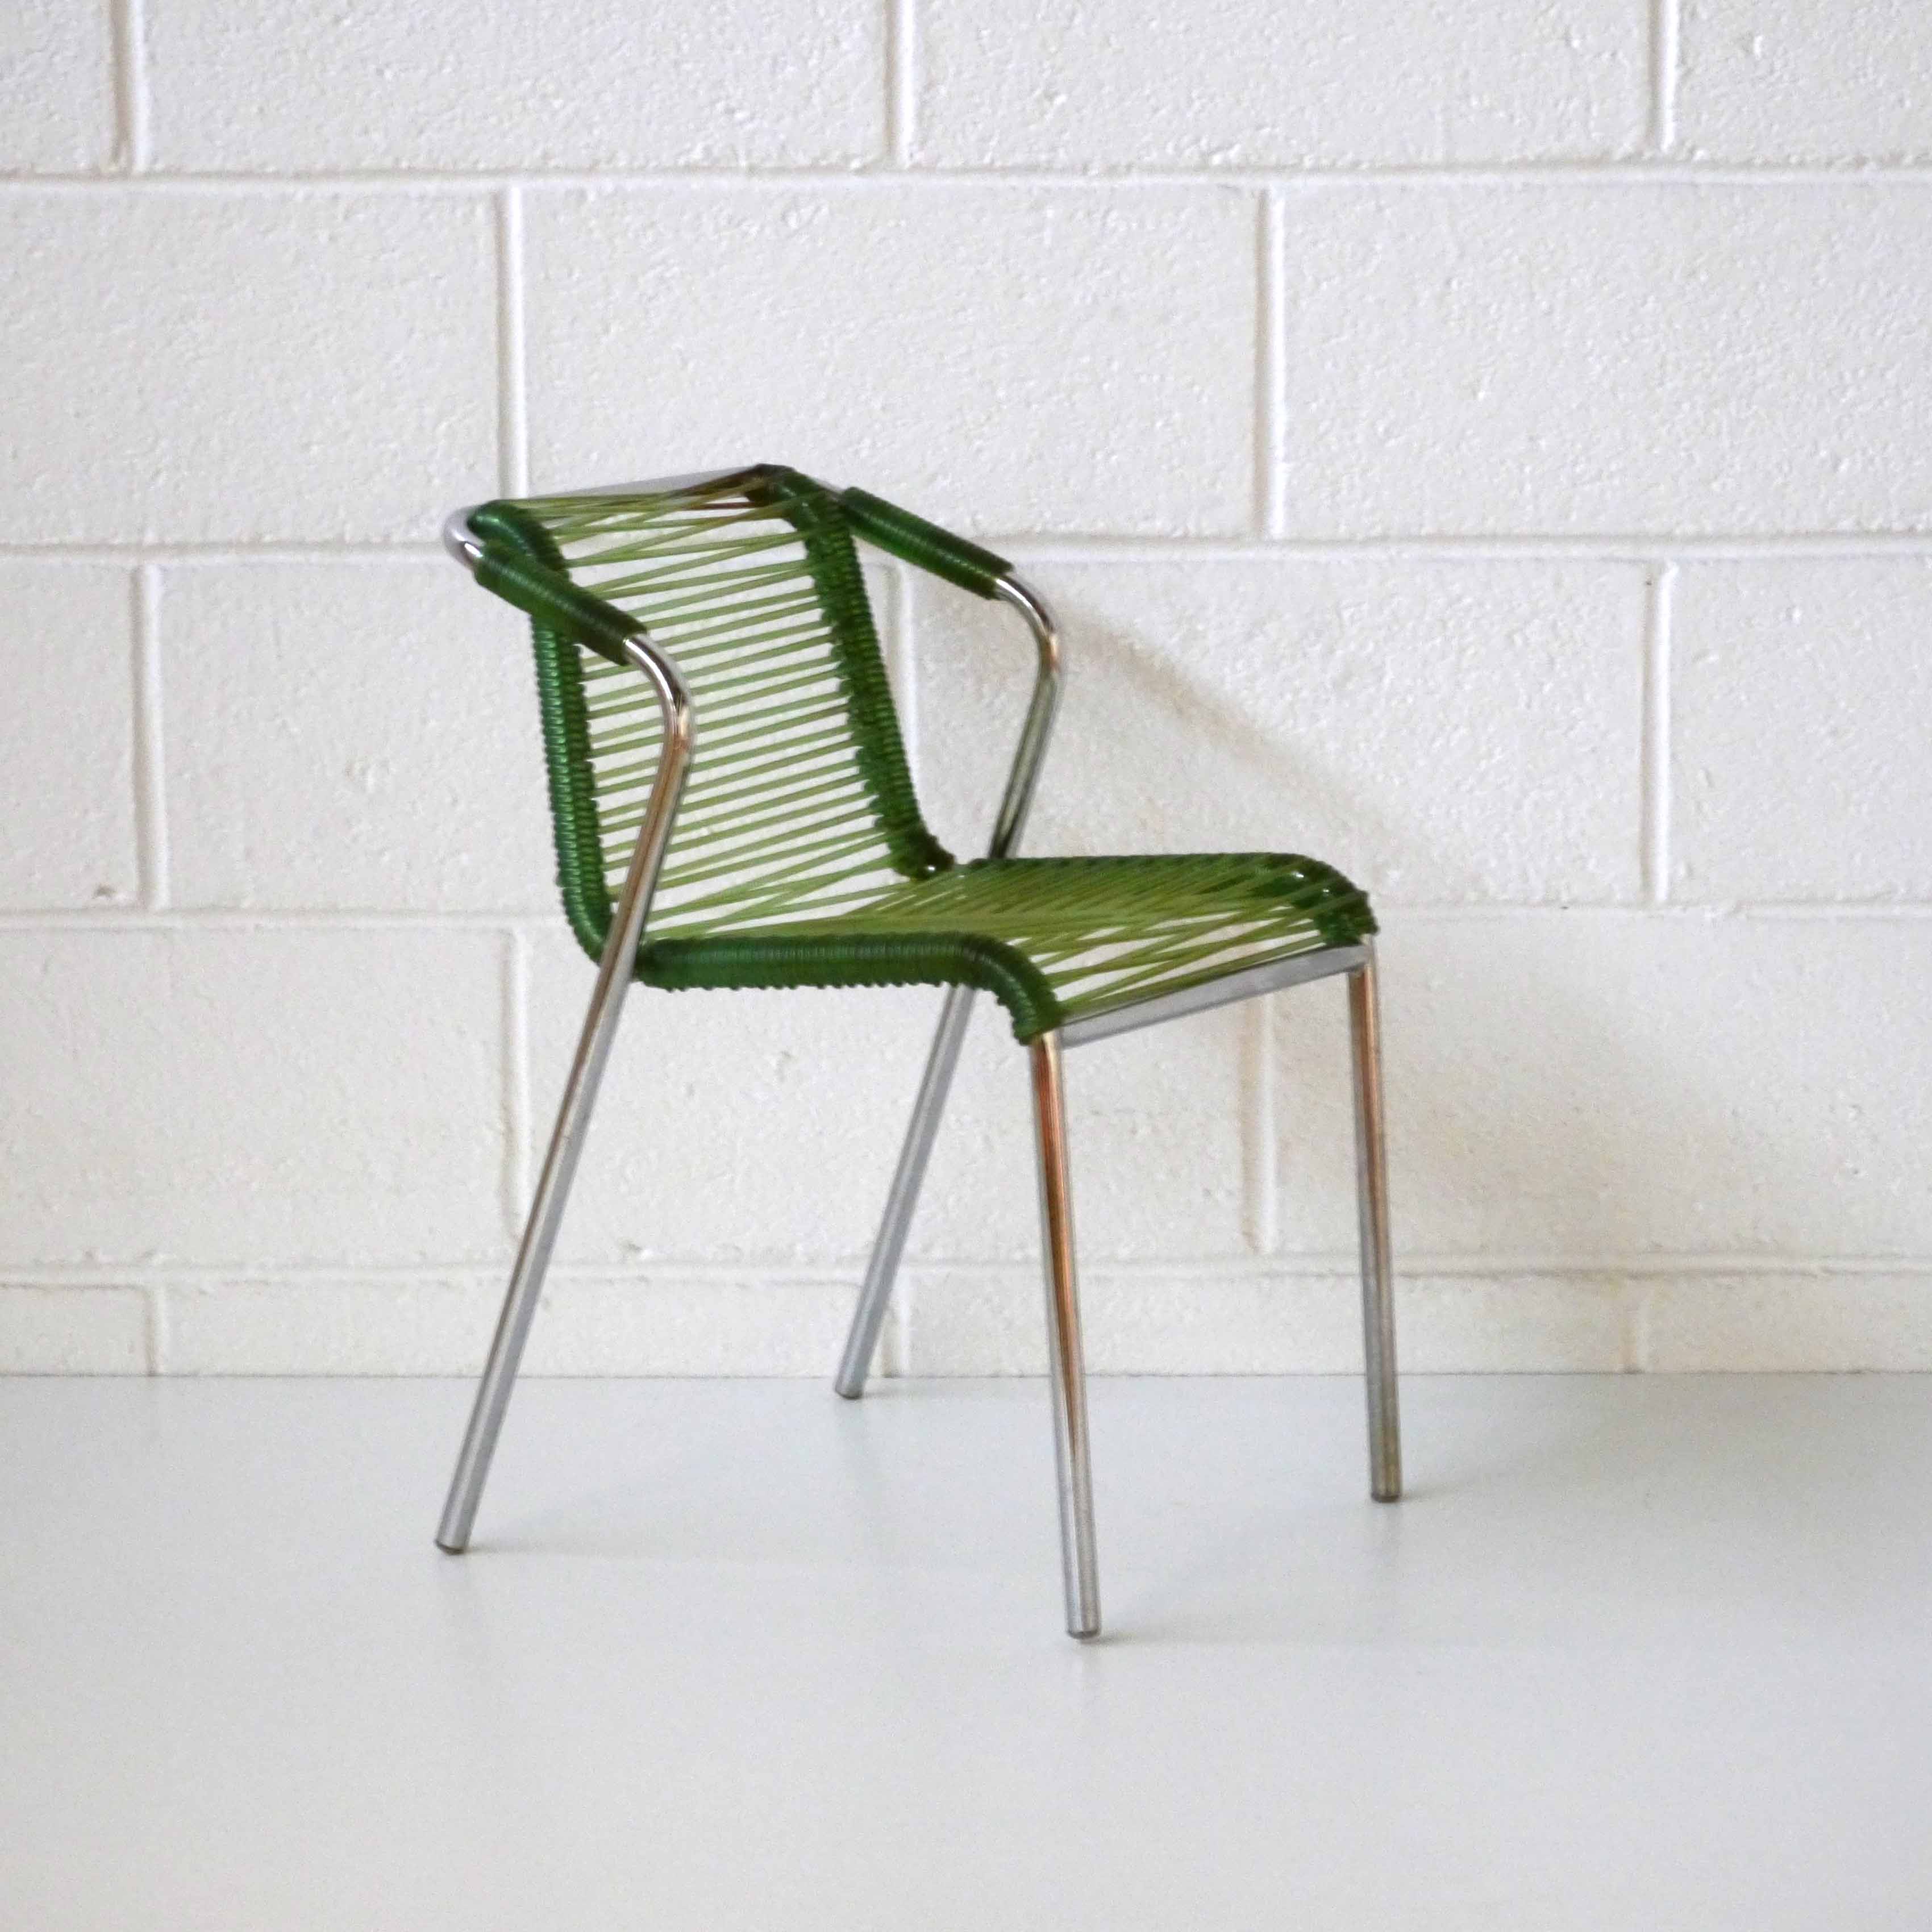 french-chilrens-chair-circa-1957